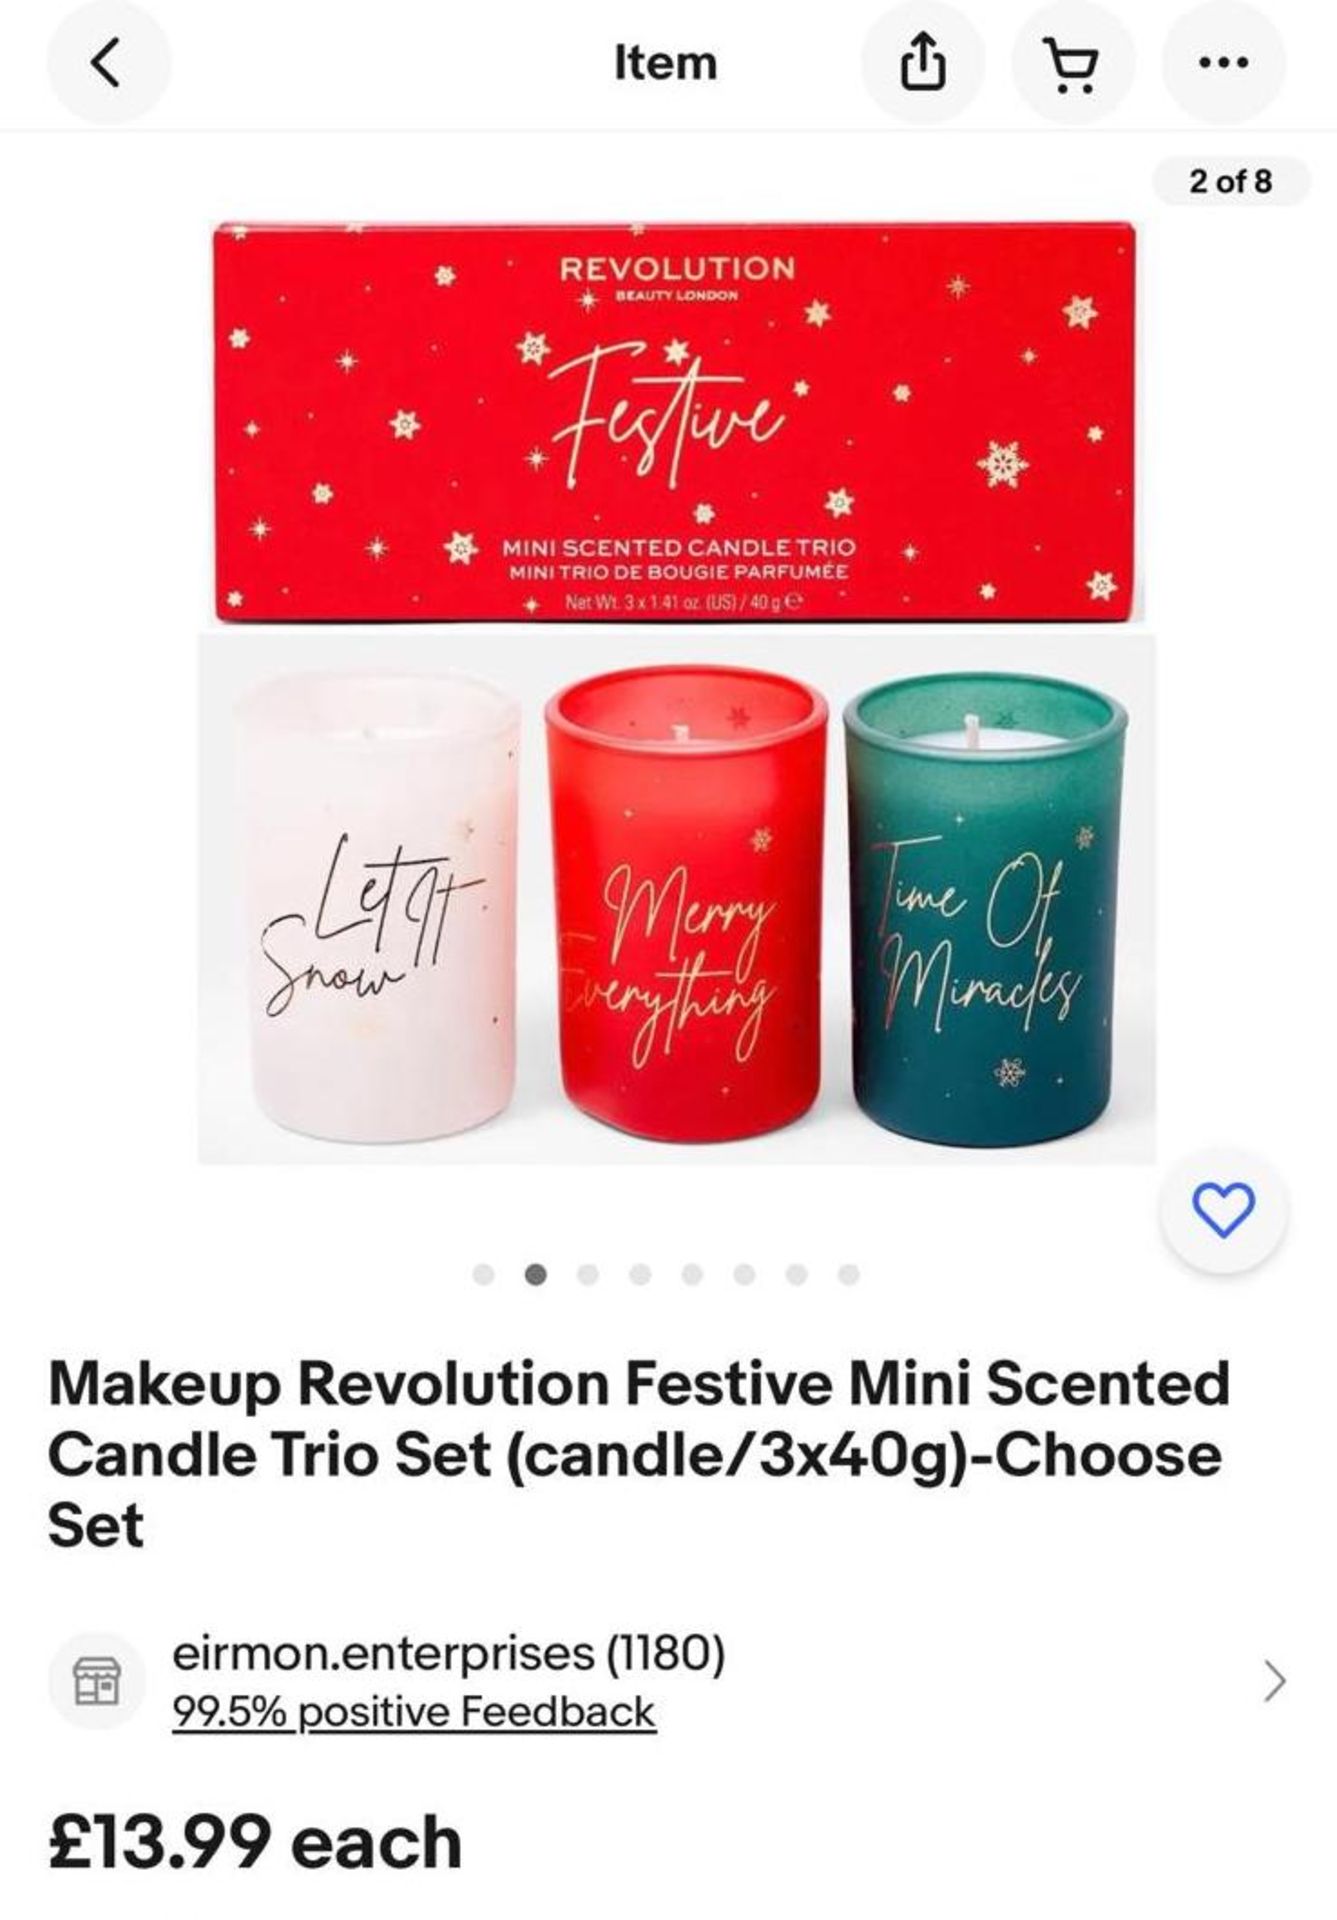 12 x Revolution Beauty London Festive Mini Scented Candle Trio Set - 3 x 40g - (NEW) - RRP £214.60 ! - Image 2 of 2